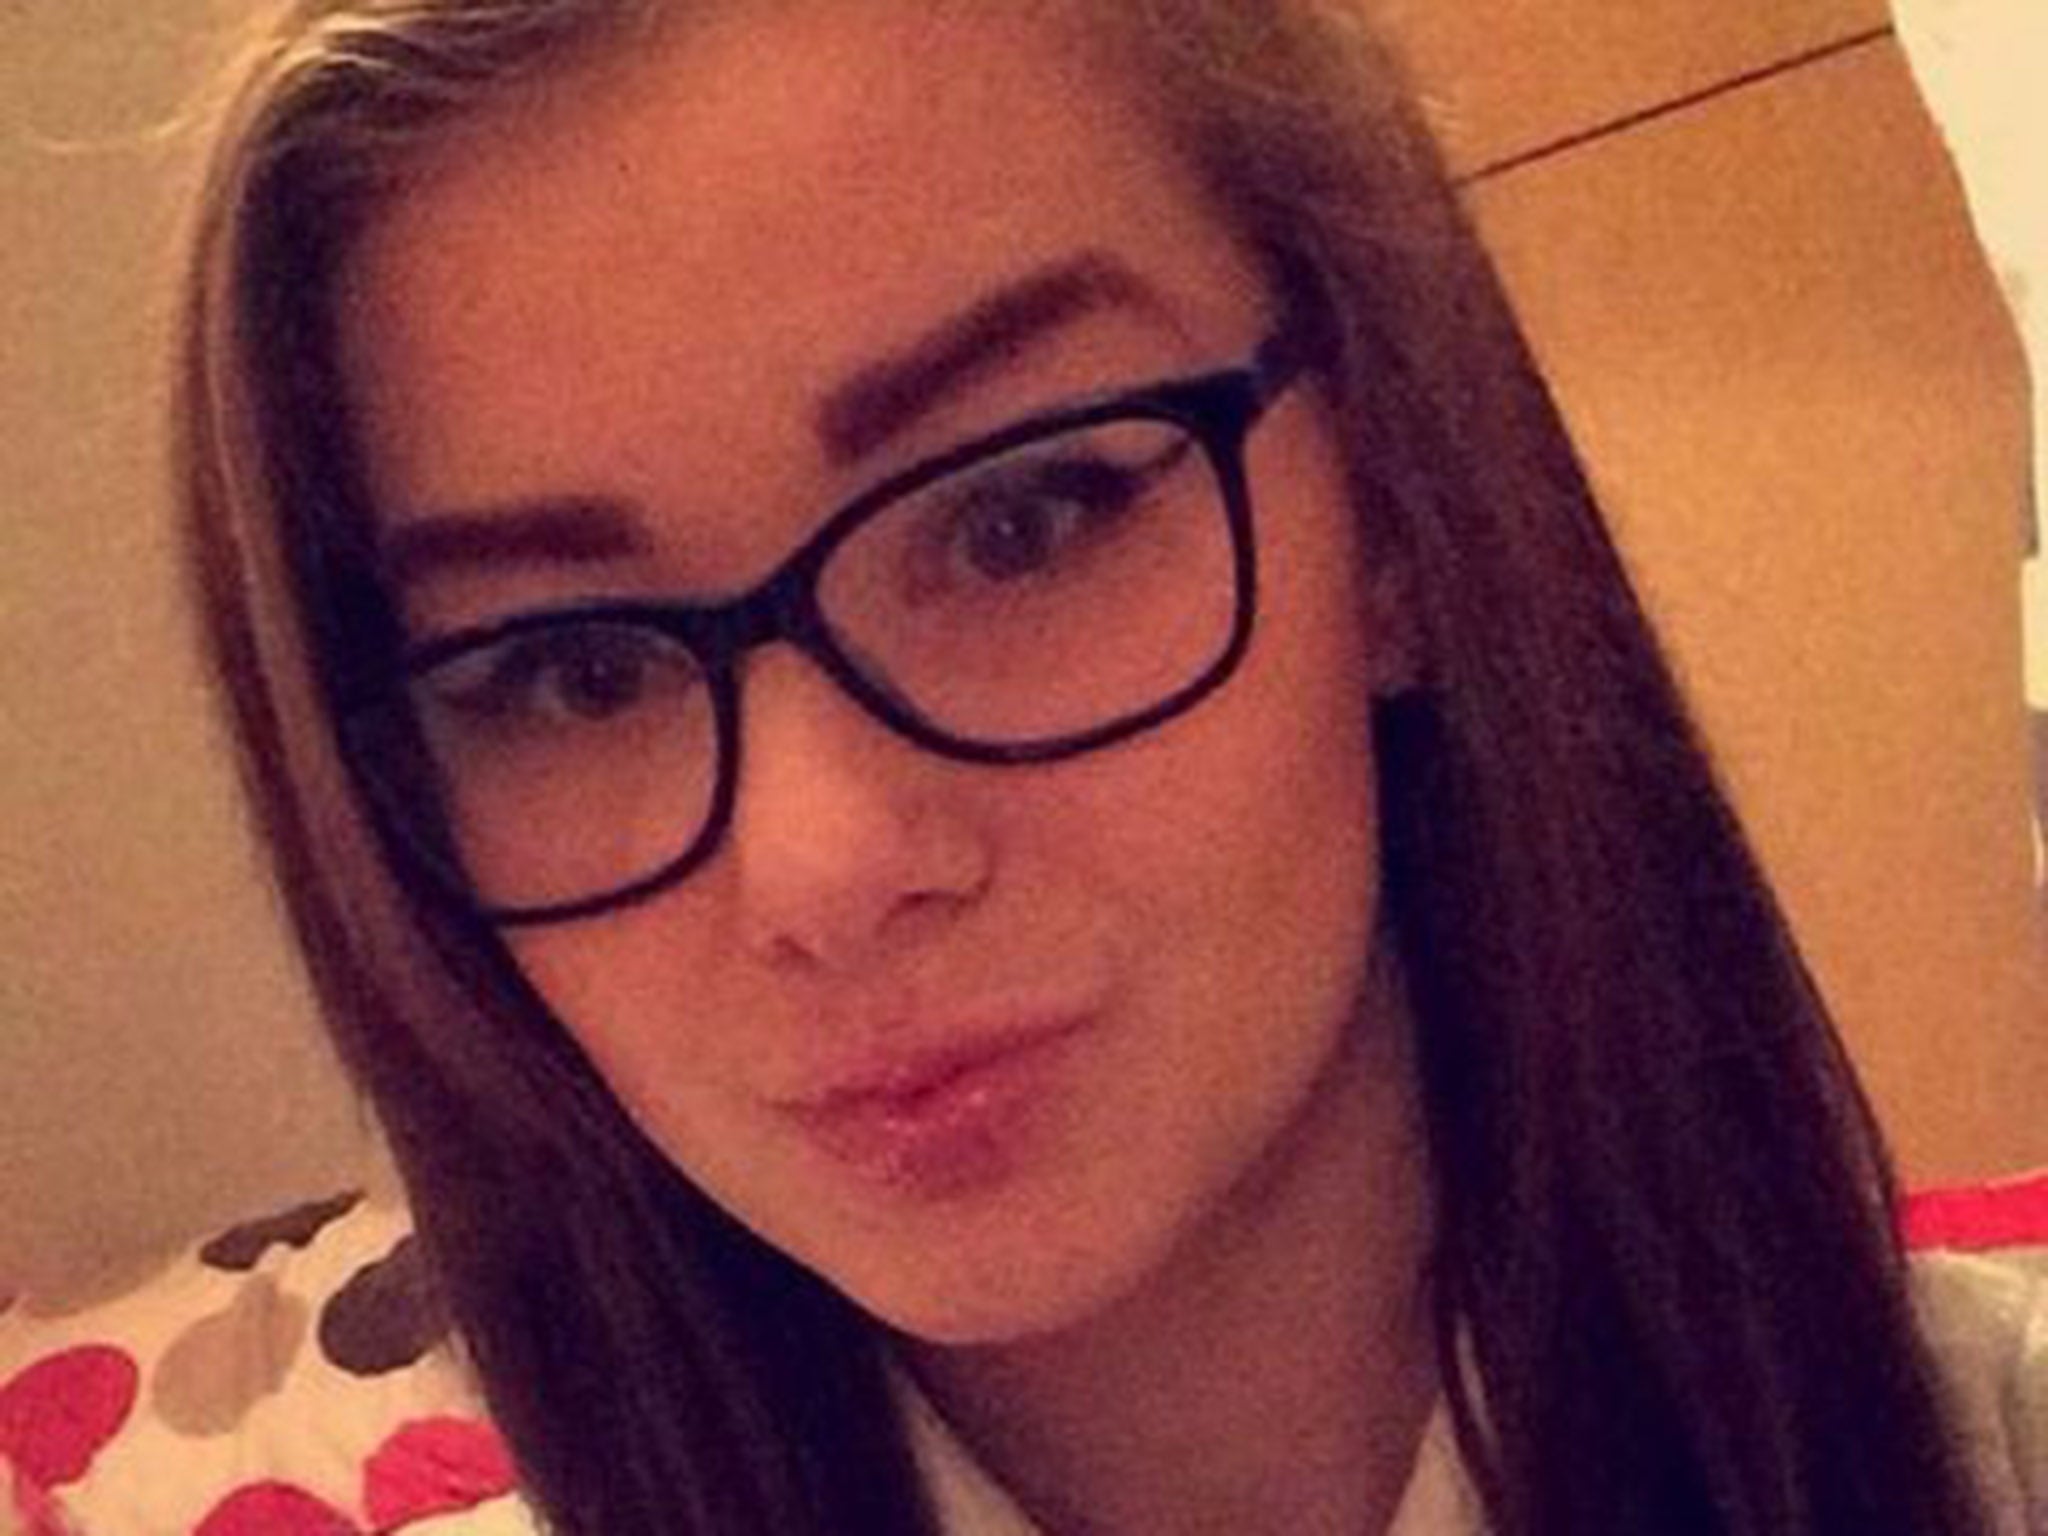 Fears had been growing for Jade Lynch since her various social media profiles had been "silent" following her disappearance